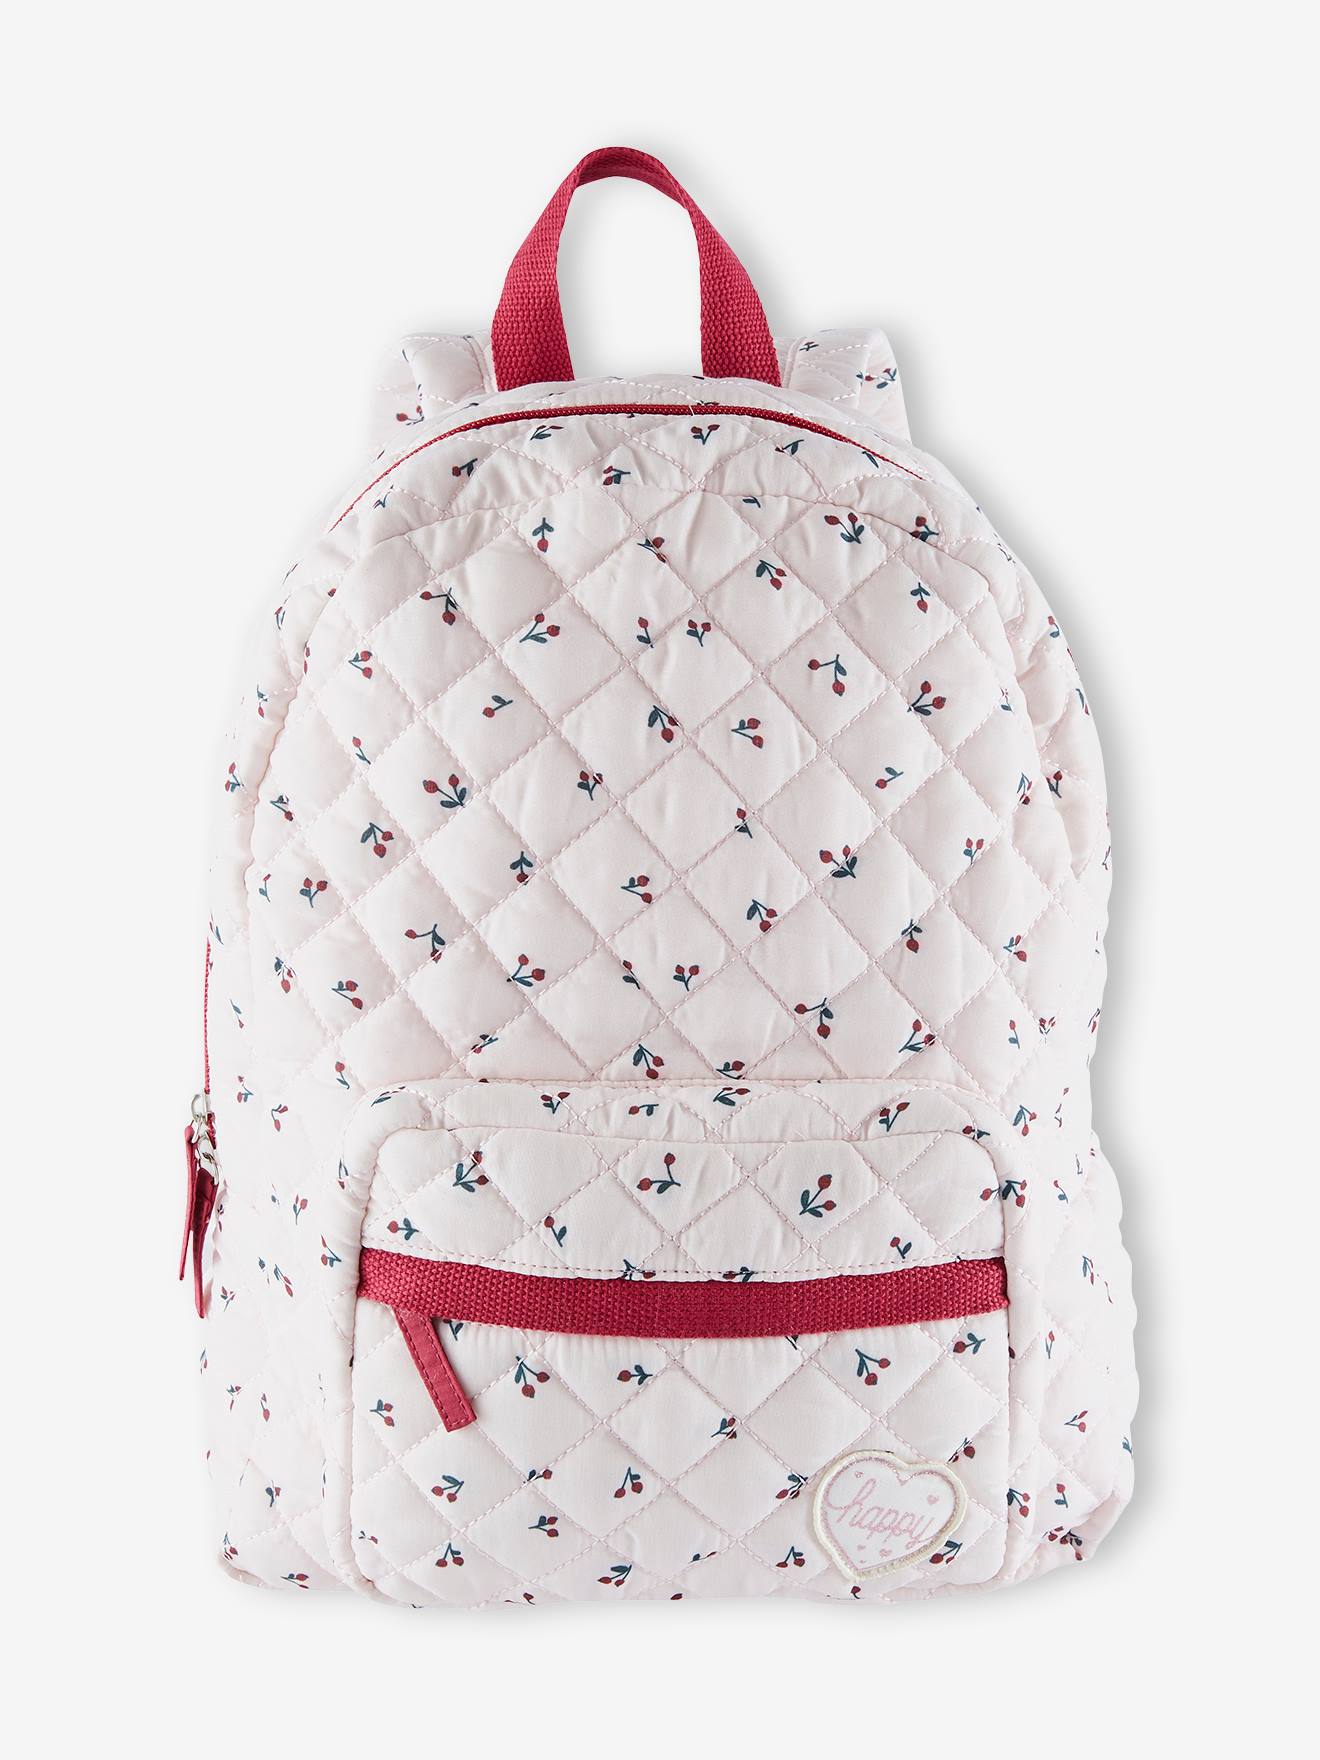 Backpack with Cherry Motifs for Girls - pink light all over printed, Girls